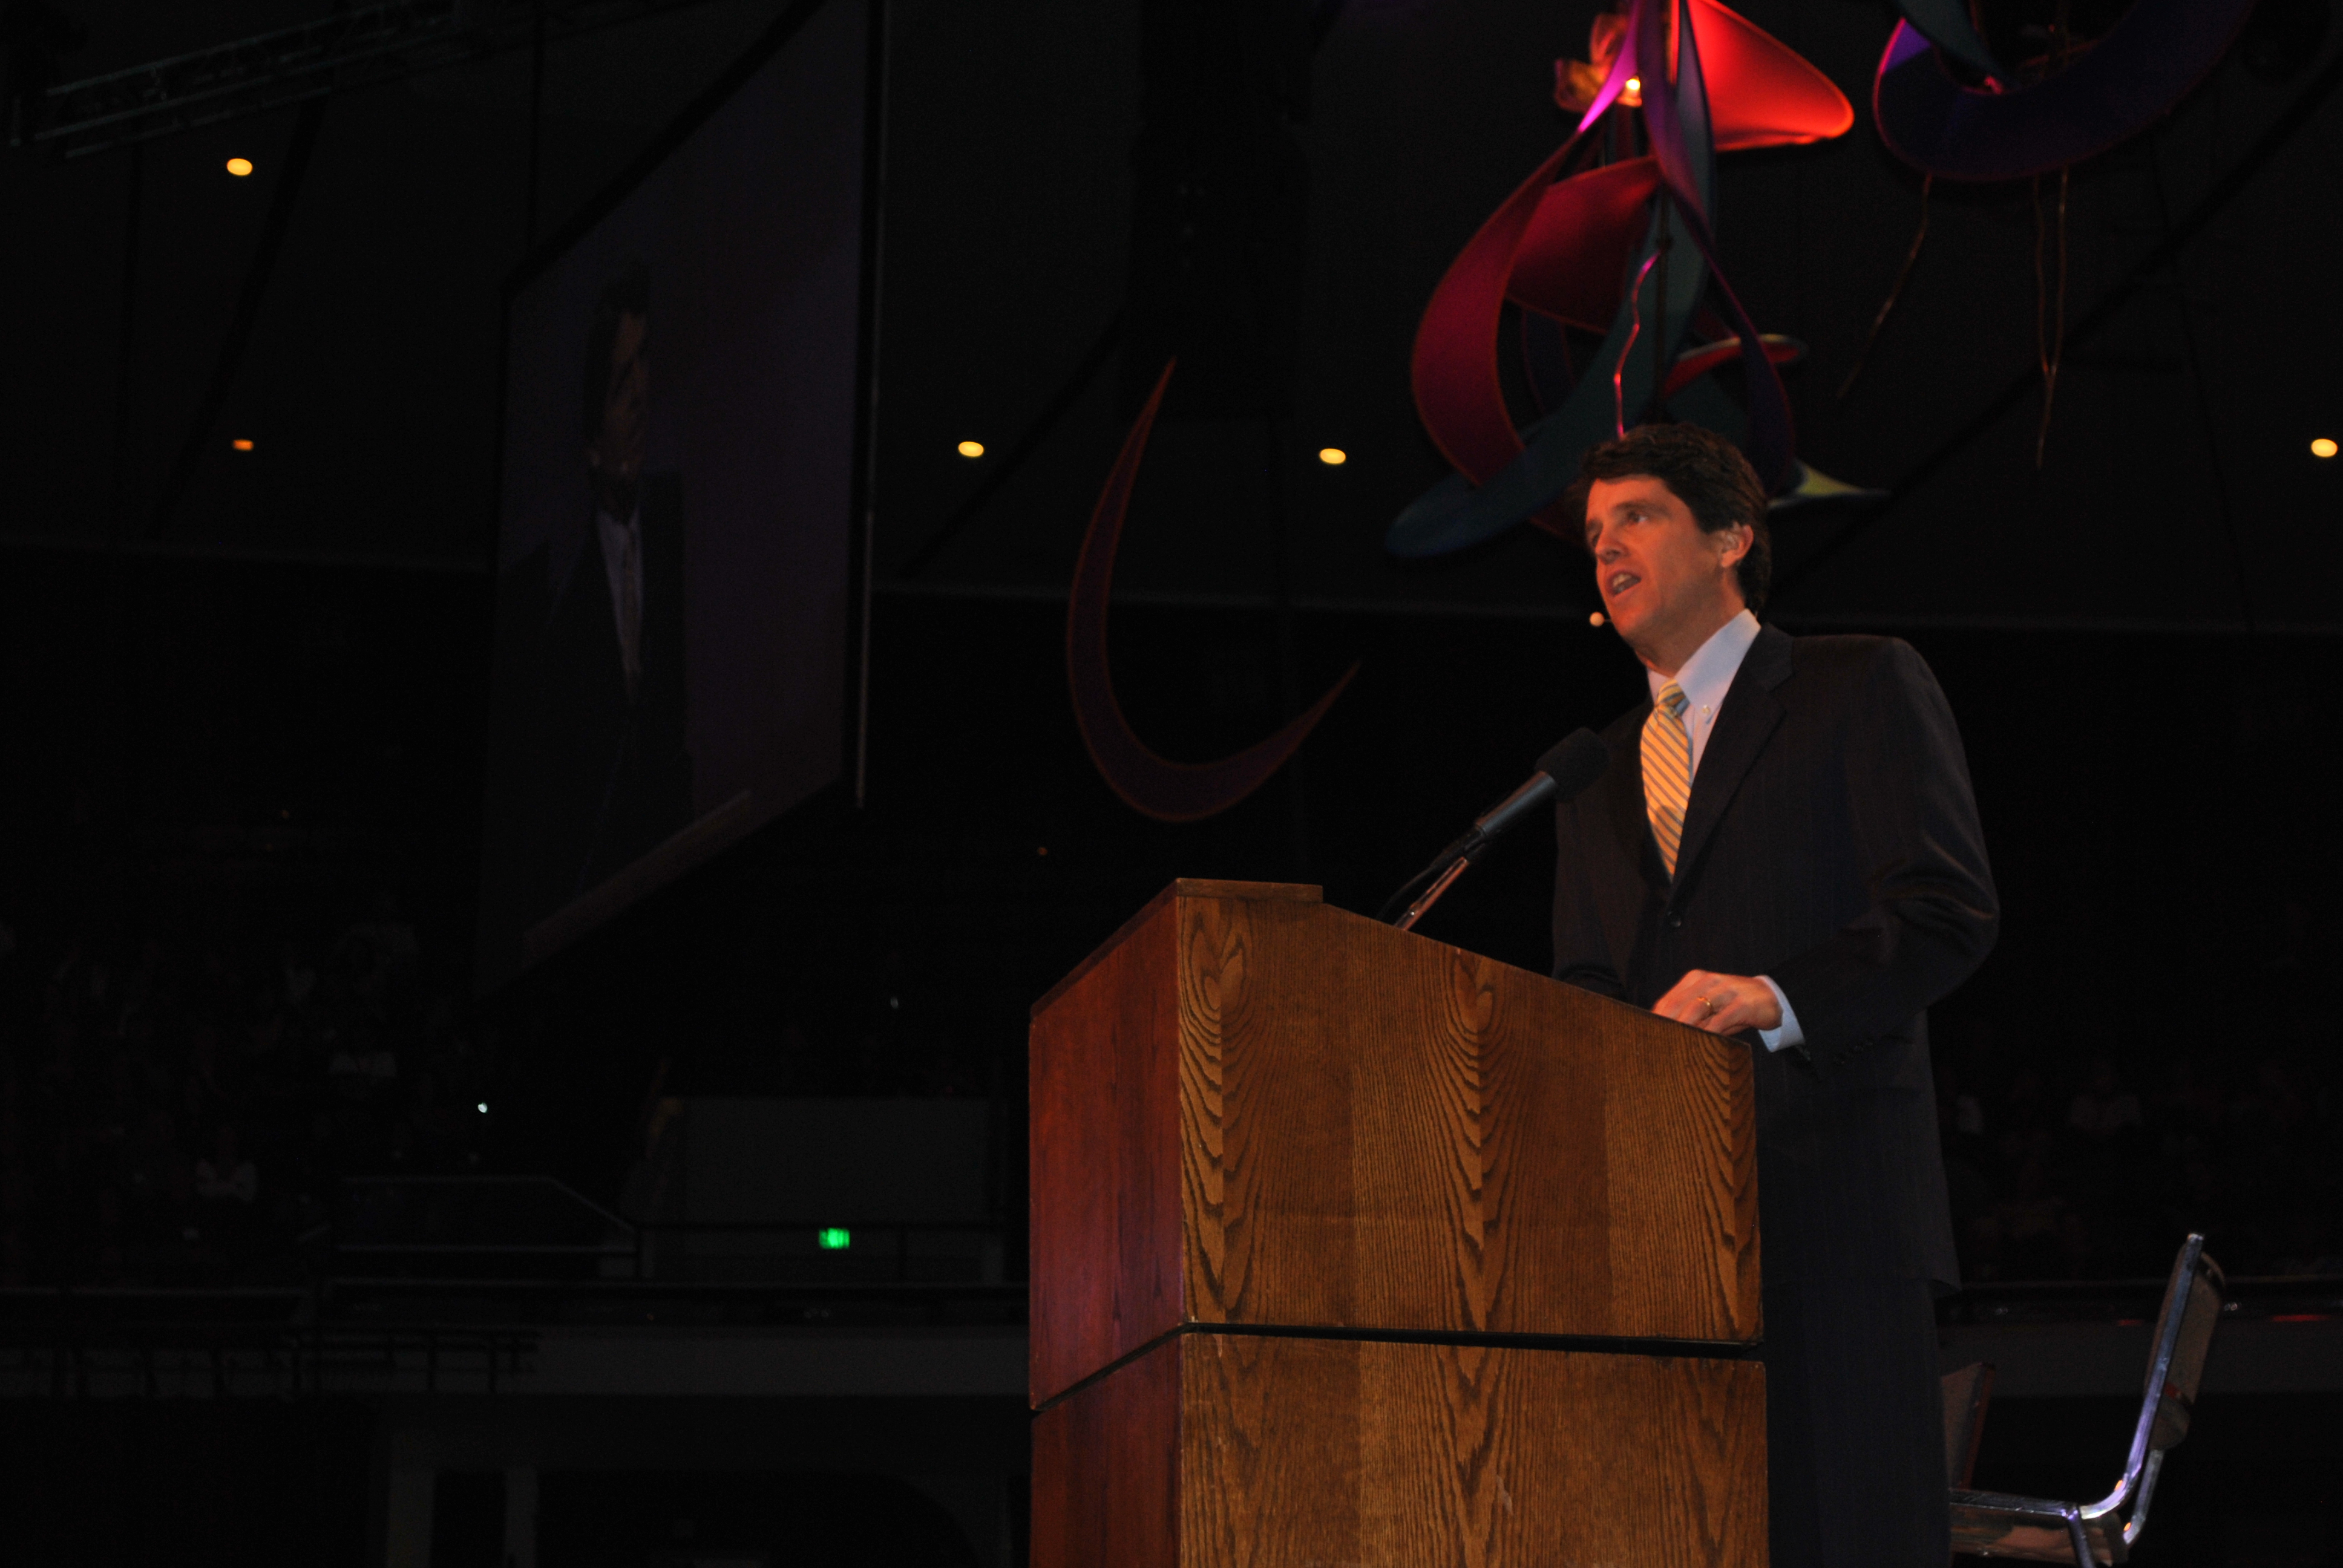 Speaker Mark Shriver talks about his father, the late Sargent Shriver in his keynote address